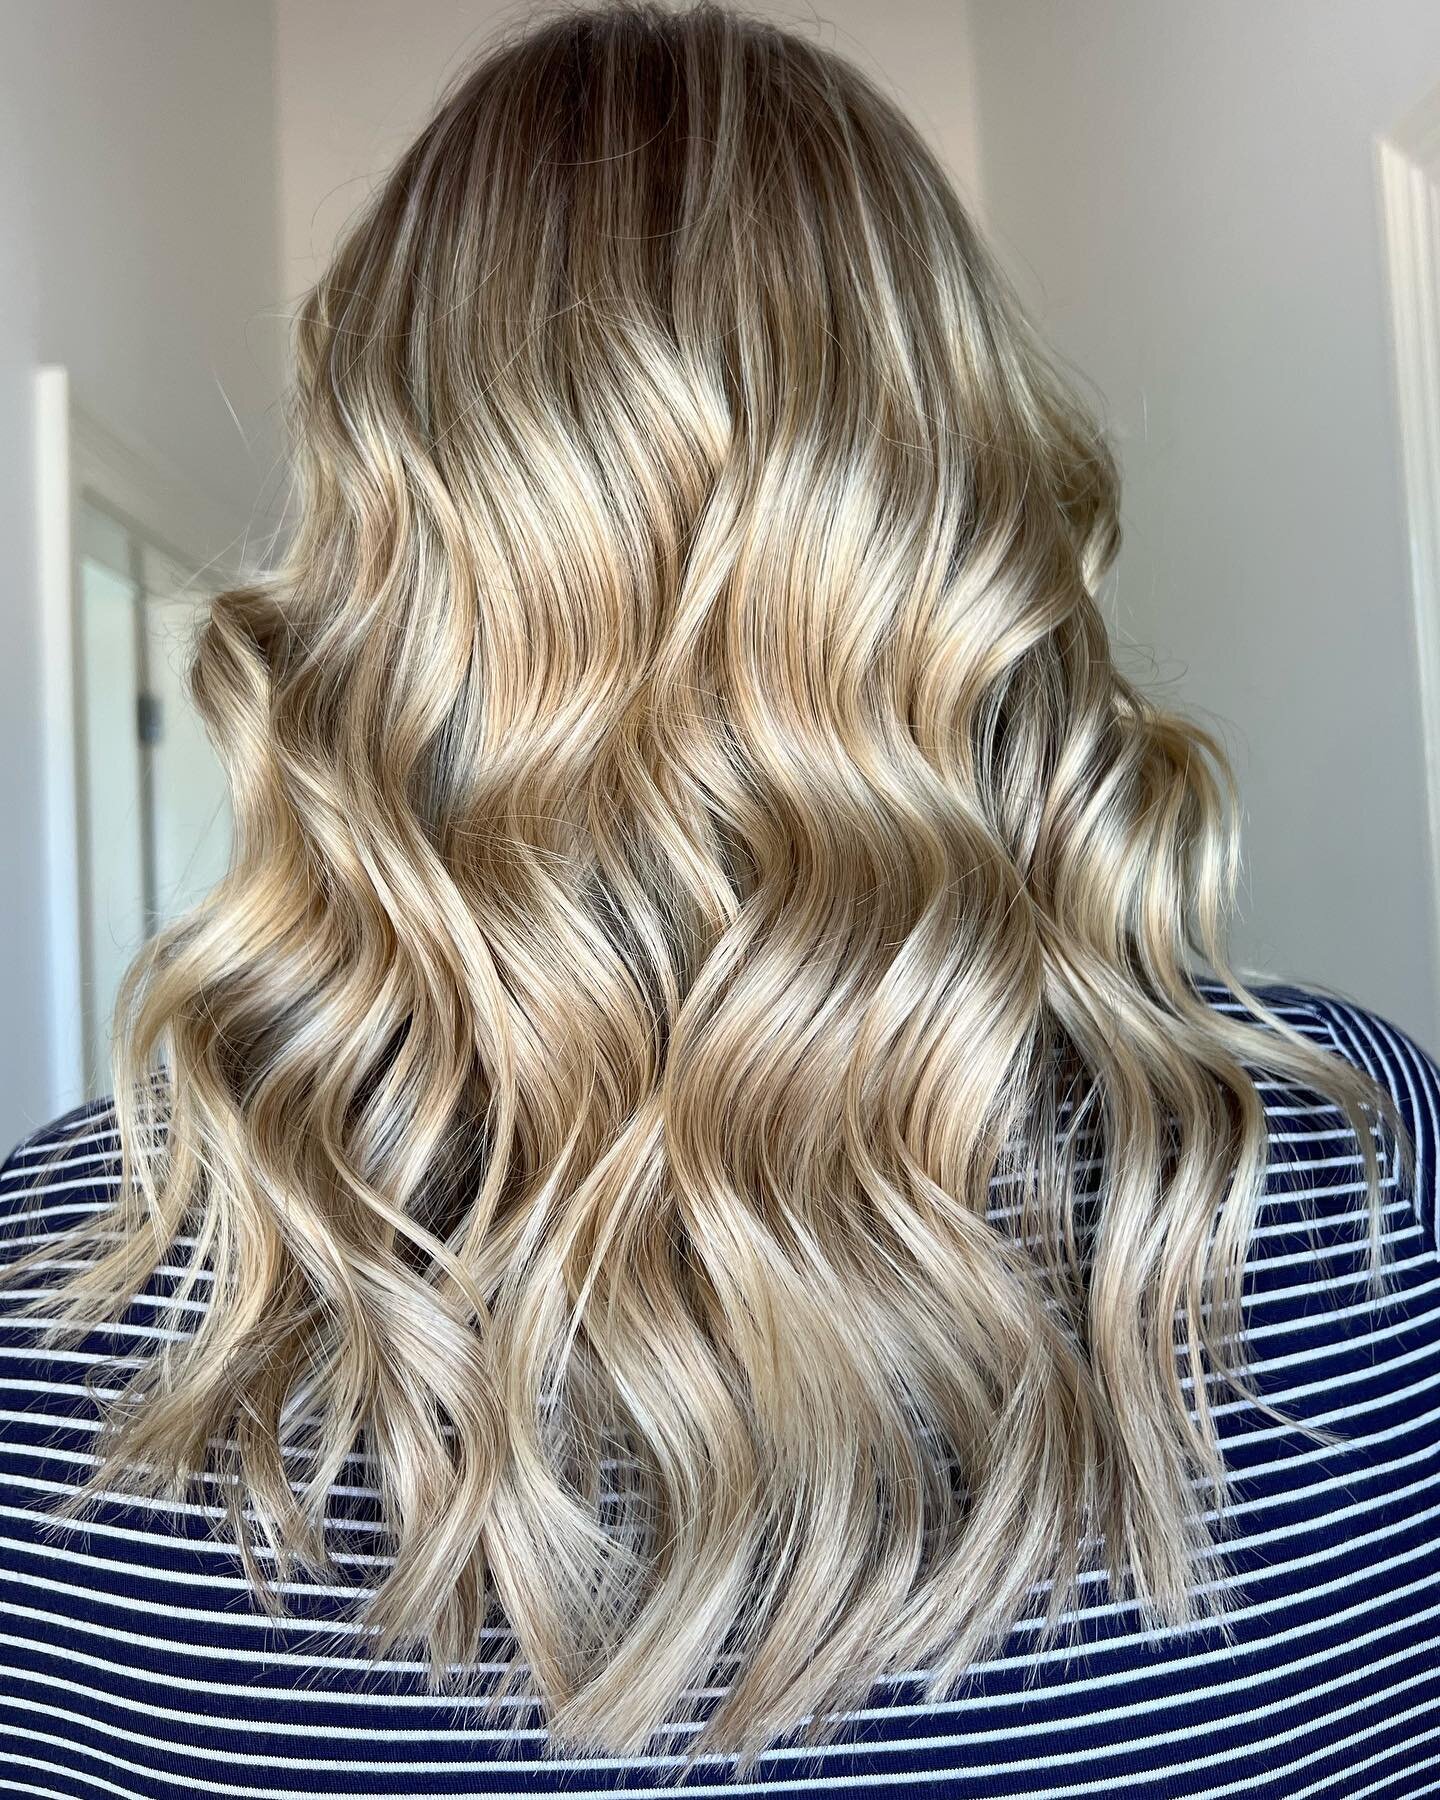 Beautiful freshen up 🌼
Colour created by @jess_hairhouseboutiquebendigo using #blondstudioloreal and powered by #metaldetoxloreal 
Styled by @leila_hairhouseboutique 

#hairhouseboutiquebendigo #bendigohair #bendigohairdresser #metaldetox #frenchbal